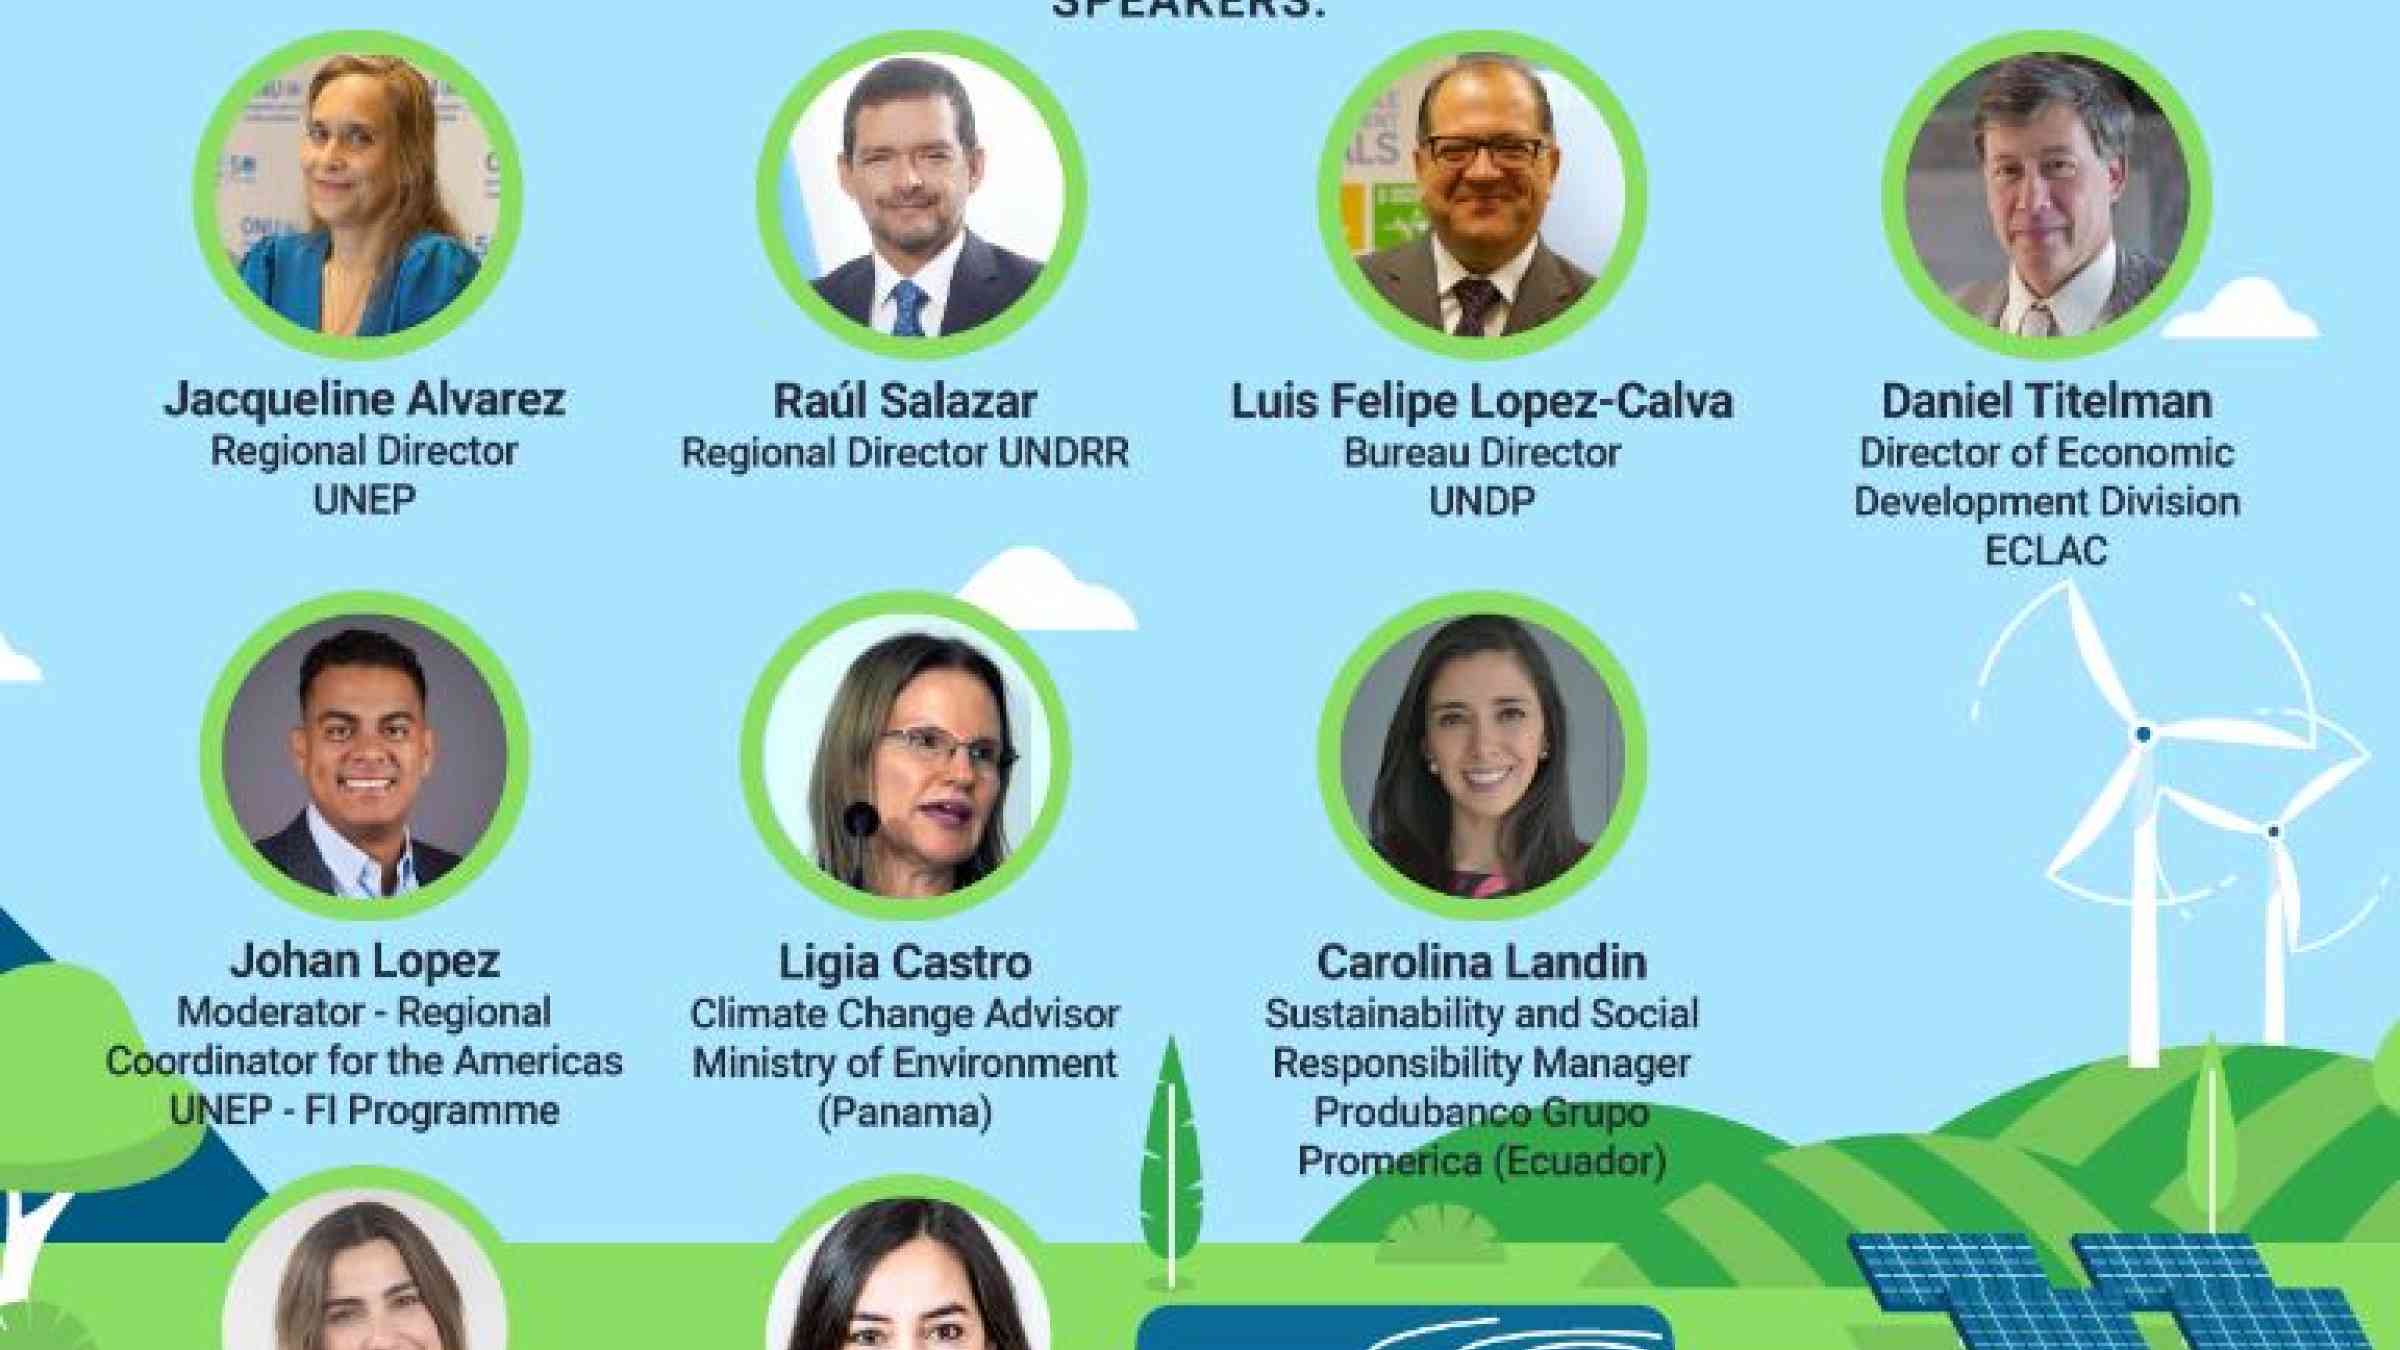 Innovative  Financial  Instruments  and  Good  Practices  to  achieve  the SDGs  and Paris Agreement inLatin America and the Caribbean